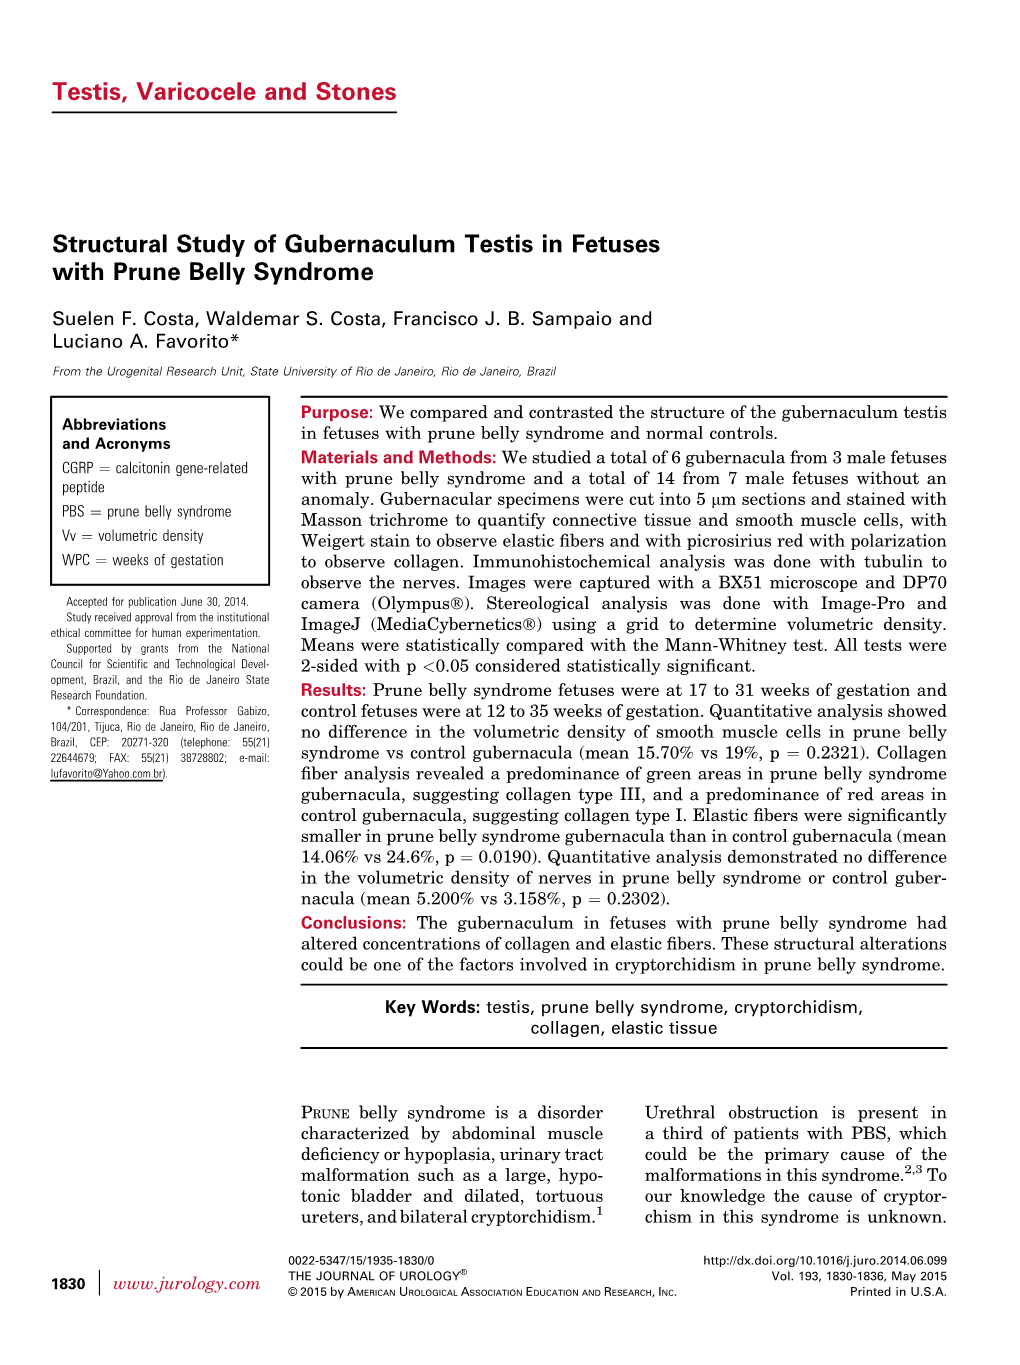 Structural Study of Gubernaculum Testis in Fetuses with Prune Belly Syndrome